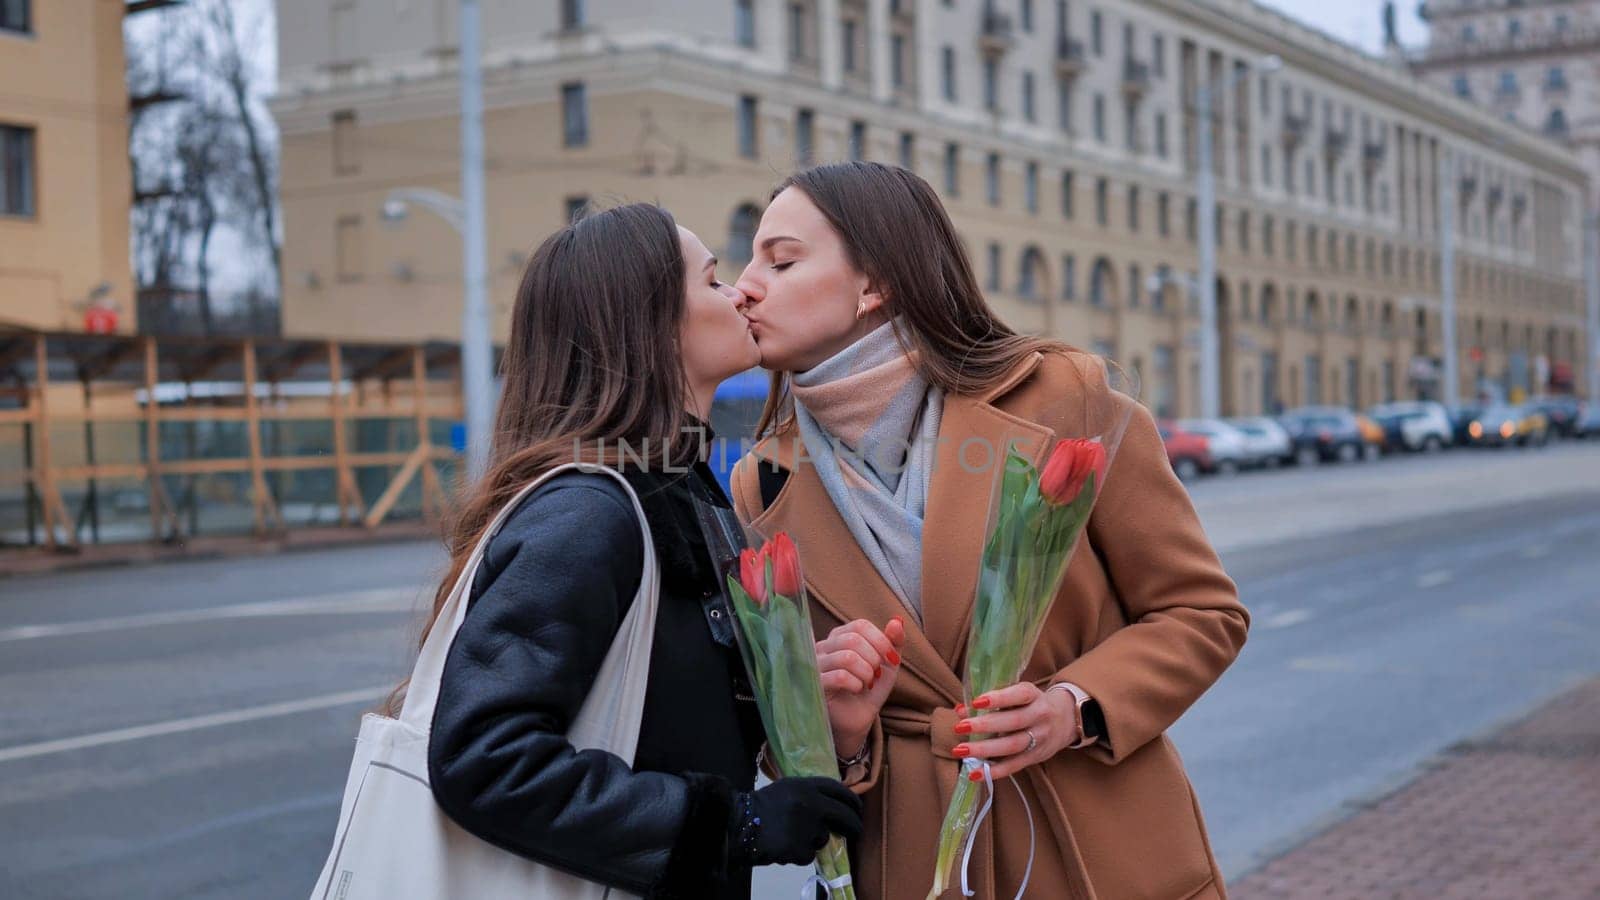 Two young women kissing each other on a city street